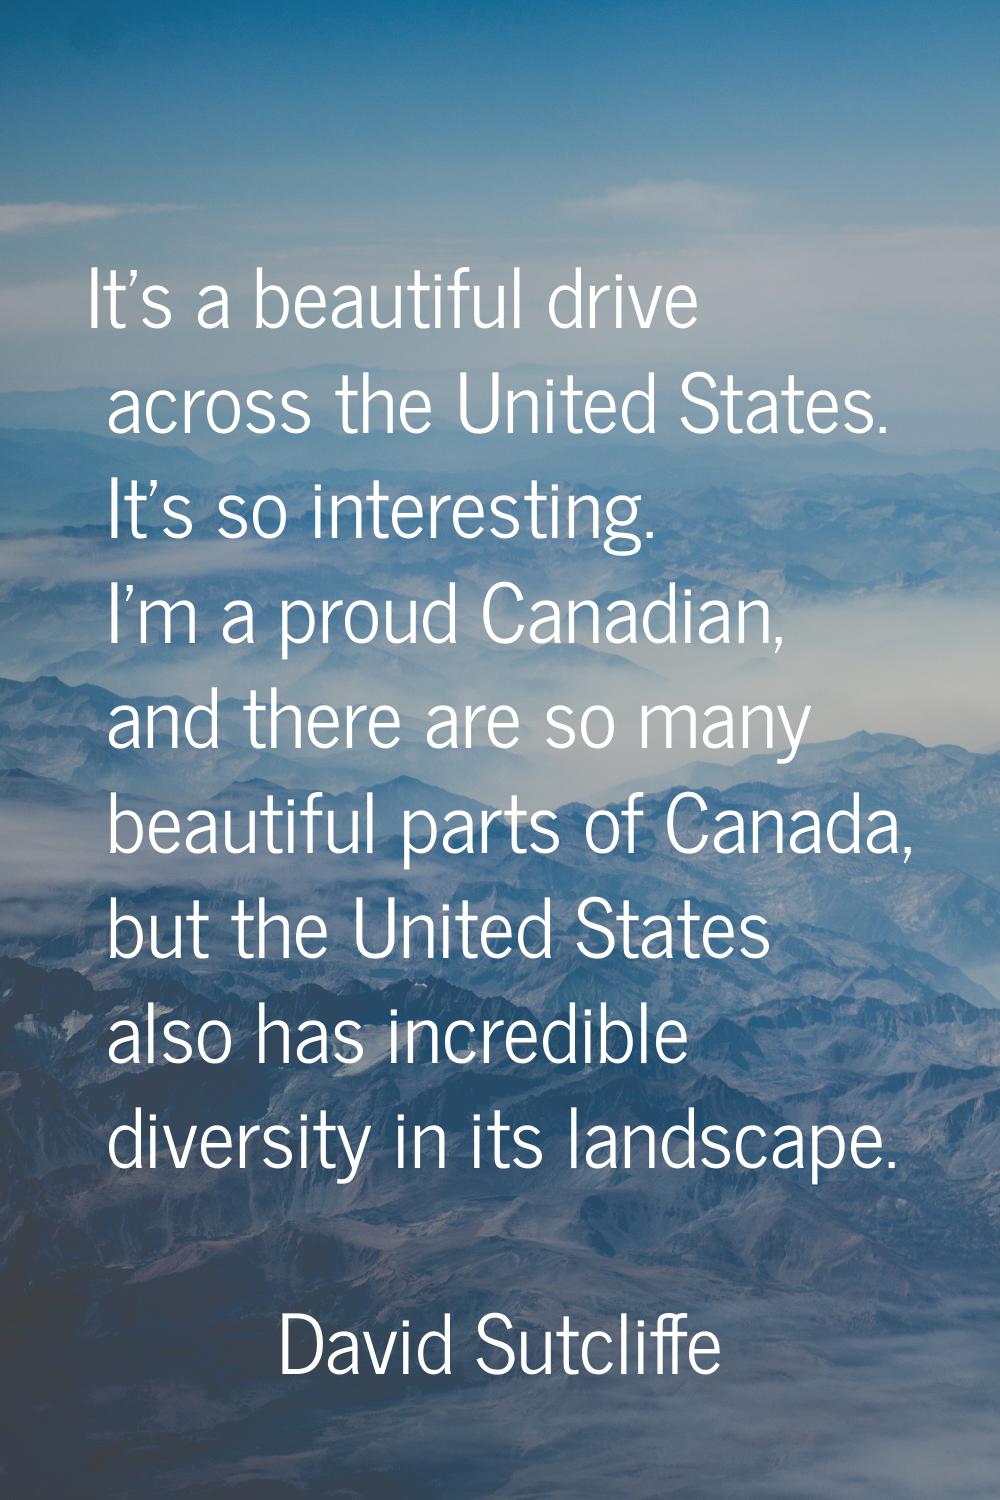 It's a beautiful drive across the United States. It's so interesting. I'm a proud Canadian, and the